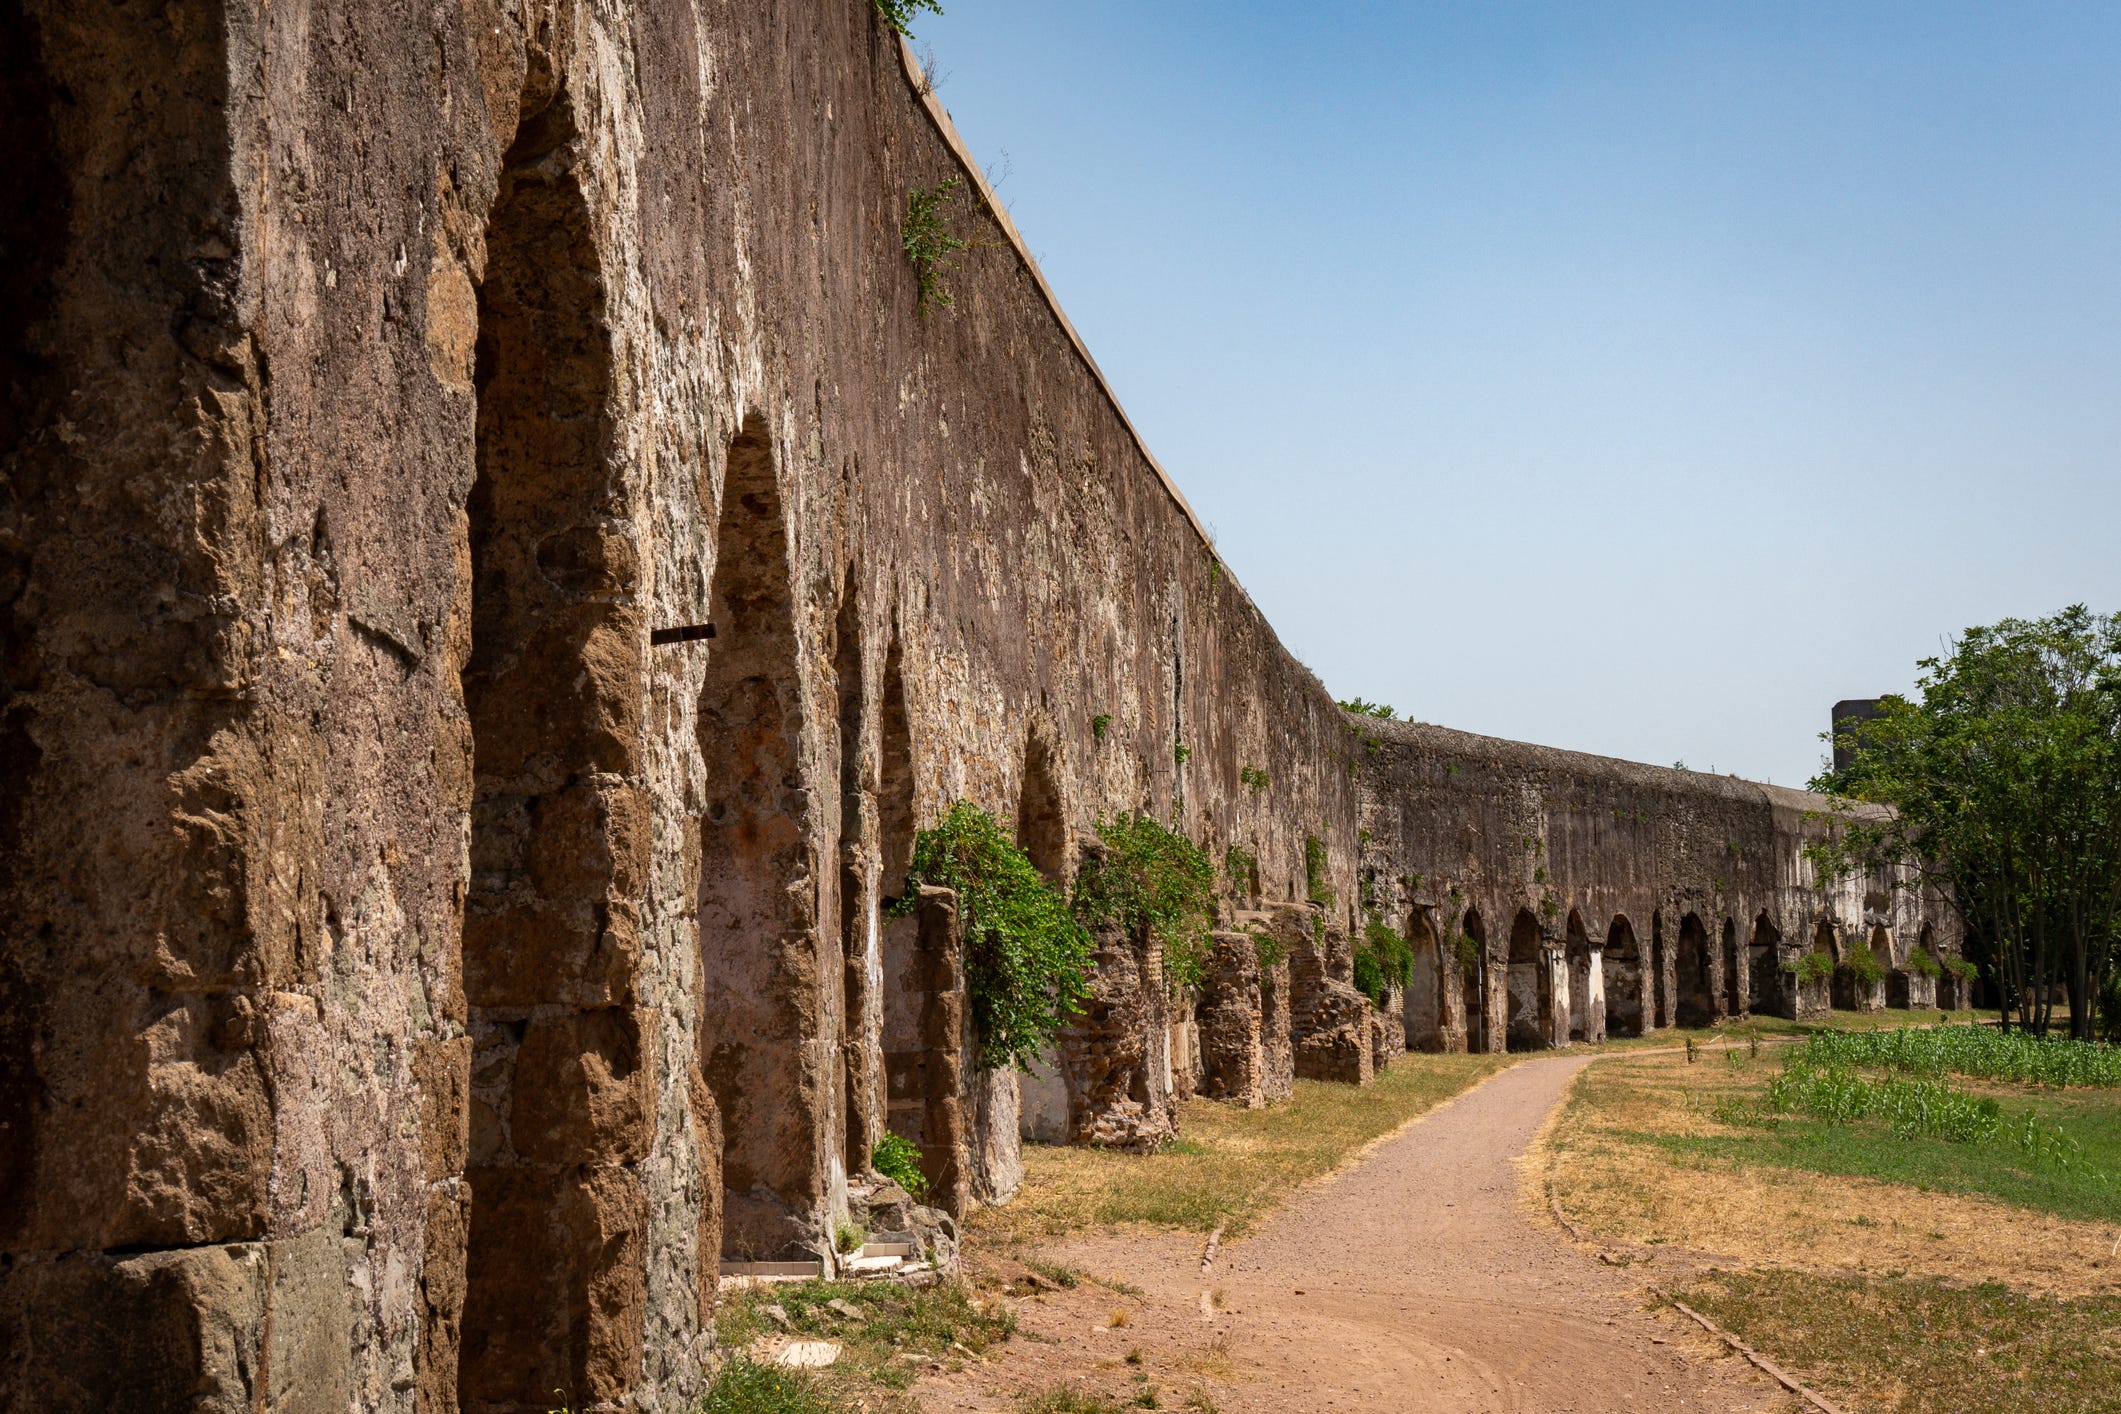 <p>The Parco degli Acquedotti, or the Park of the Aqueducts, extends for nearly 600 acres just outside of Rome.</p><p>Also a popular spot for cycling, dog-walking, and picnics, the massive park comprises the remains of ancient Roman aqueducts that carried fresh drinking water from the mountains and into the city.</p><p>It's one of my favorite places to visit on warm spring or summer days for a walk and to <a href="https://www.businessinsider.com/avoid-crowds-rome-day-trip-italian-city-bracciano-worth-it-2024-1">escape the city</a> for a bit, and it's particularly beautiful at sunset.</p>